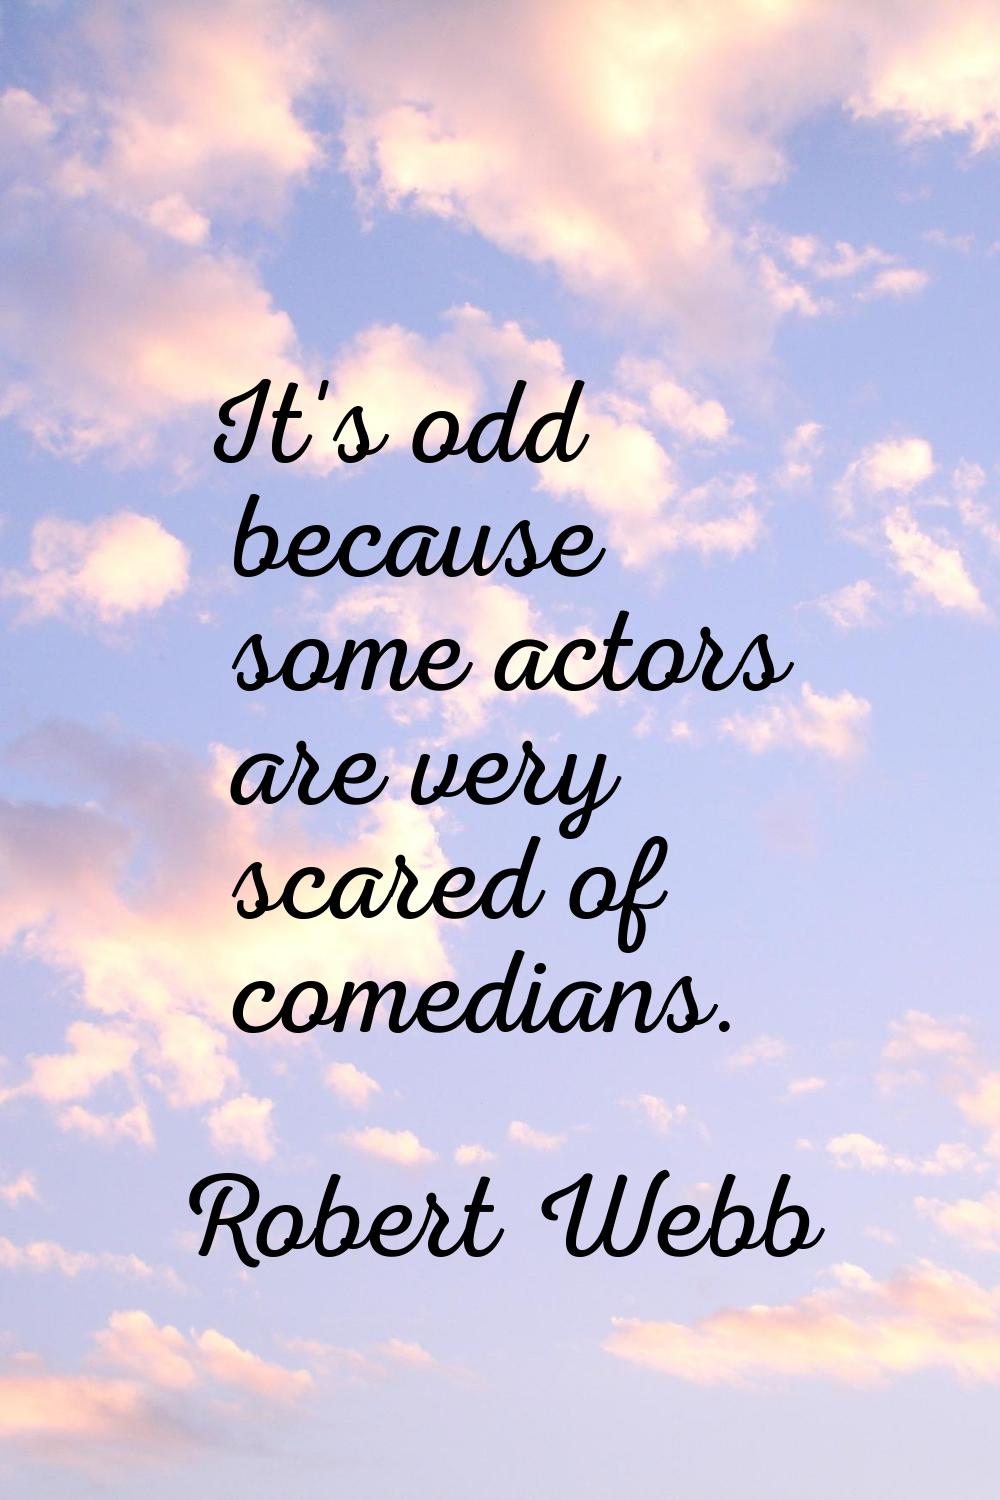 It's odd because some actors are very scared of comedians.